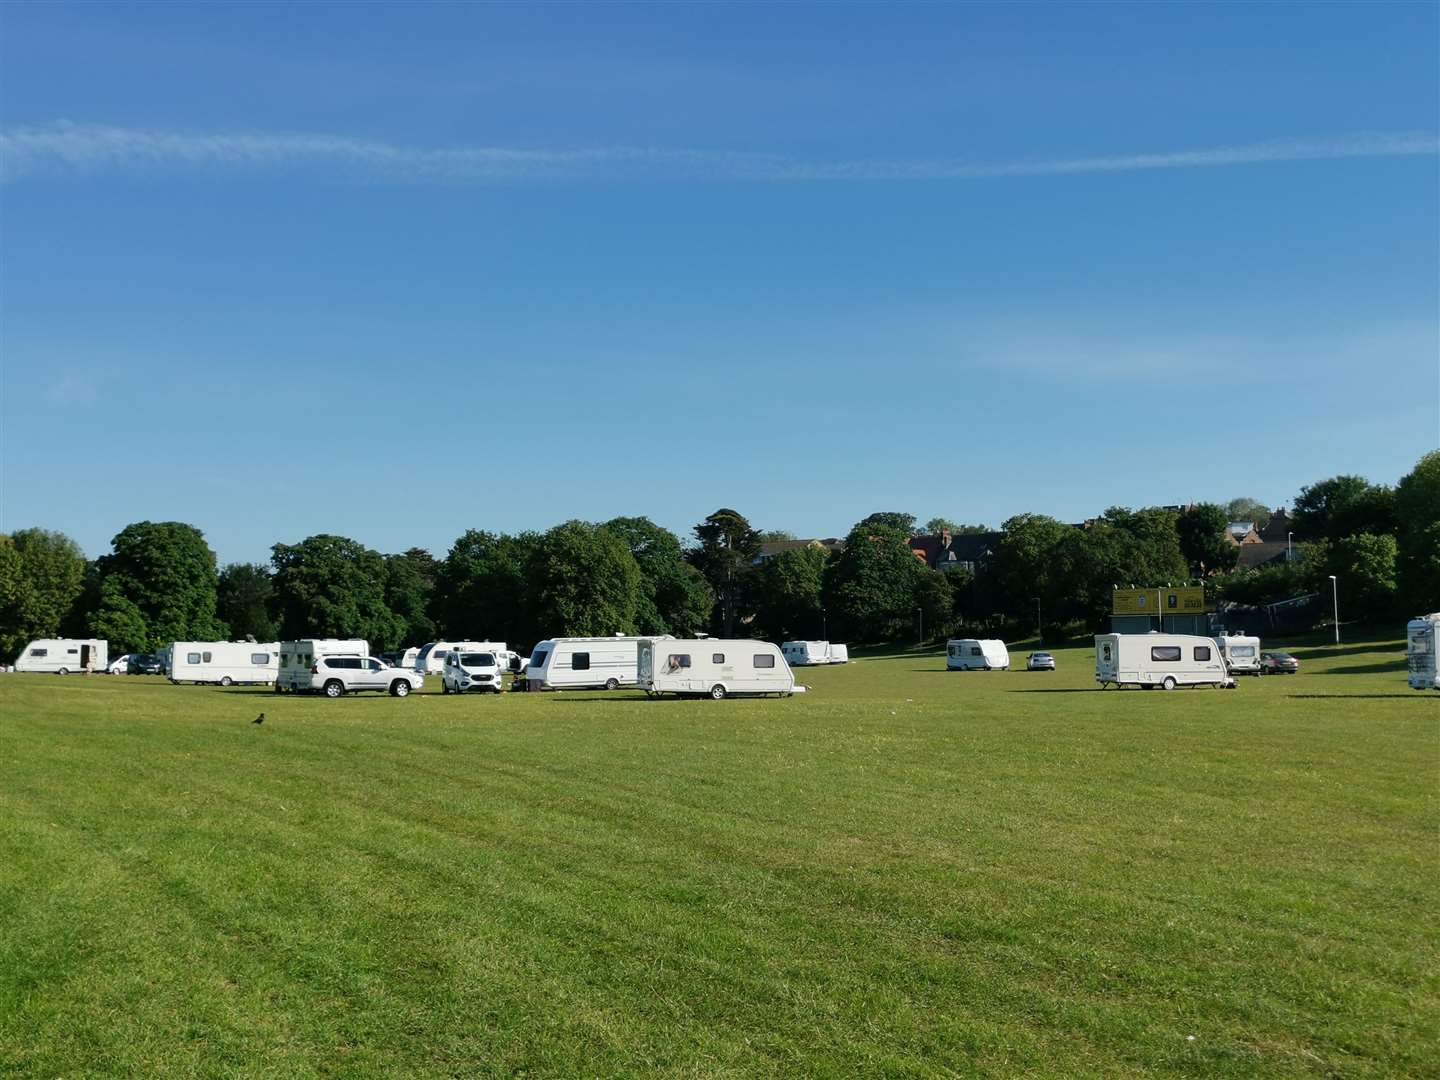 The group of travellers set up camp in Dane Park in Margate